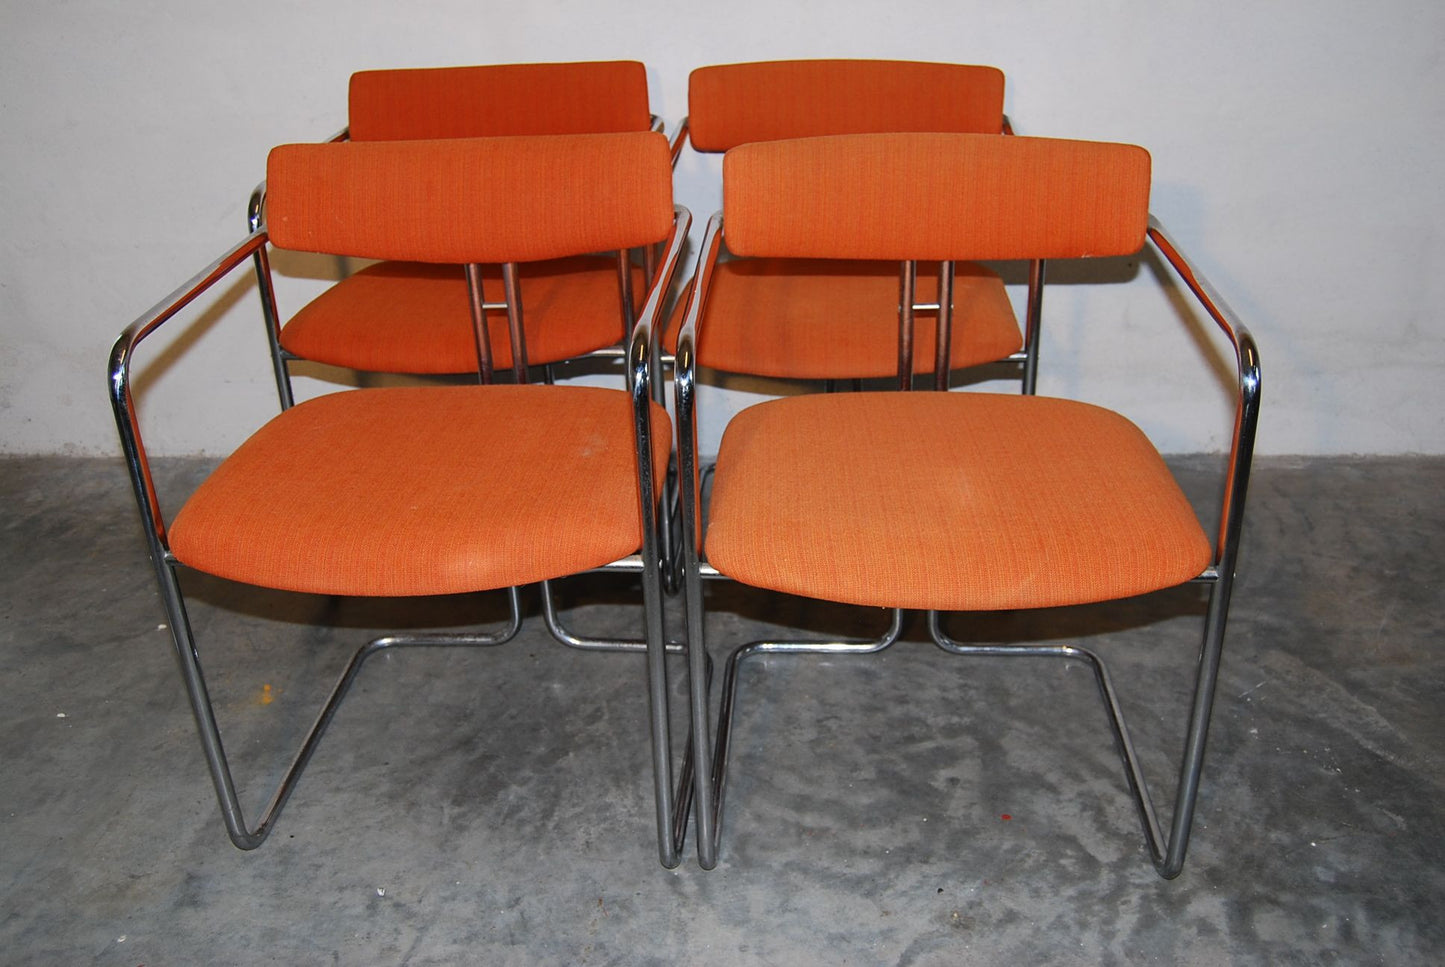 Set of Four Orange and Chrome Dining Chairs